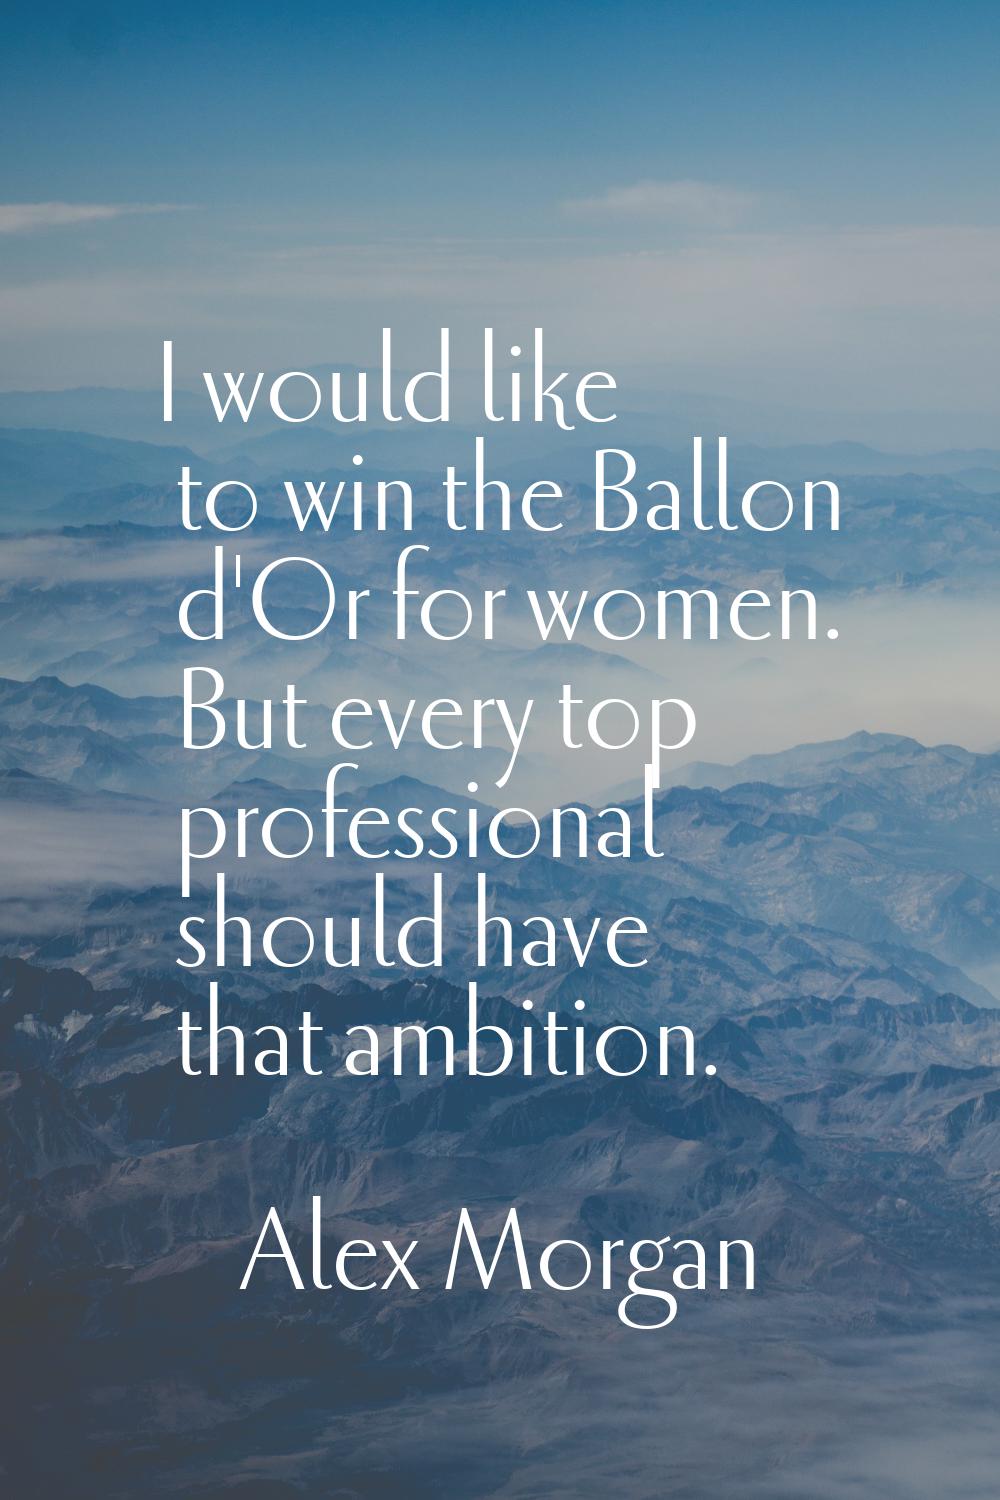 I would like to win the Ballon d'Or for women. But every top professional should have that ambition